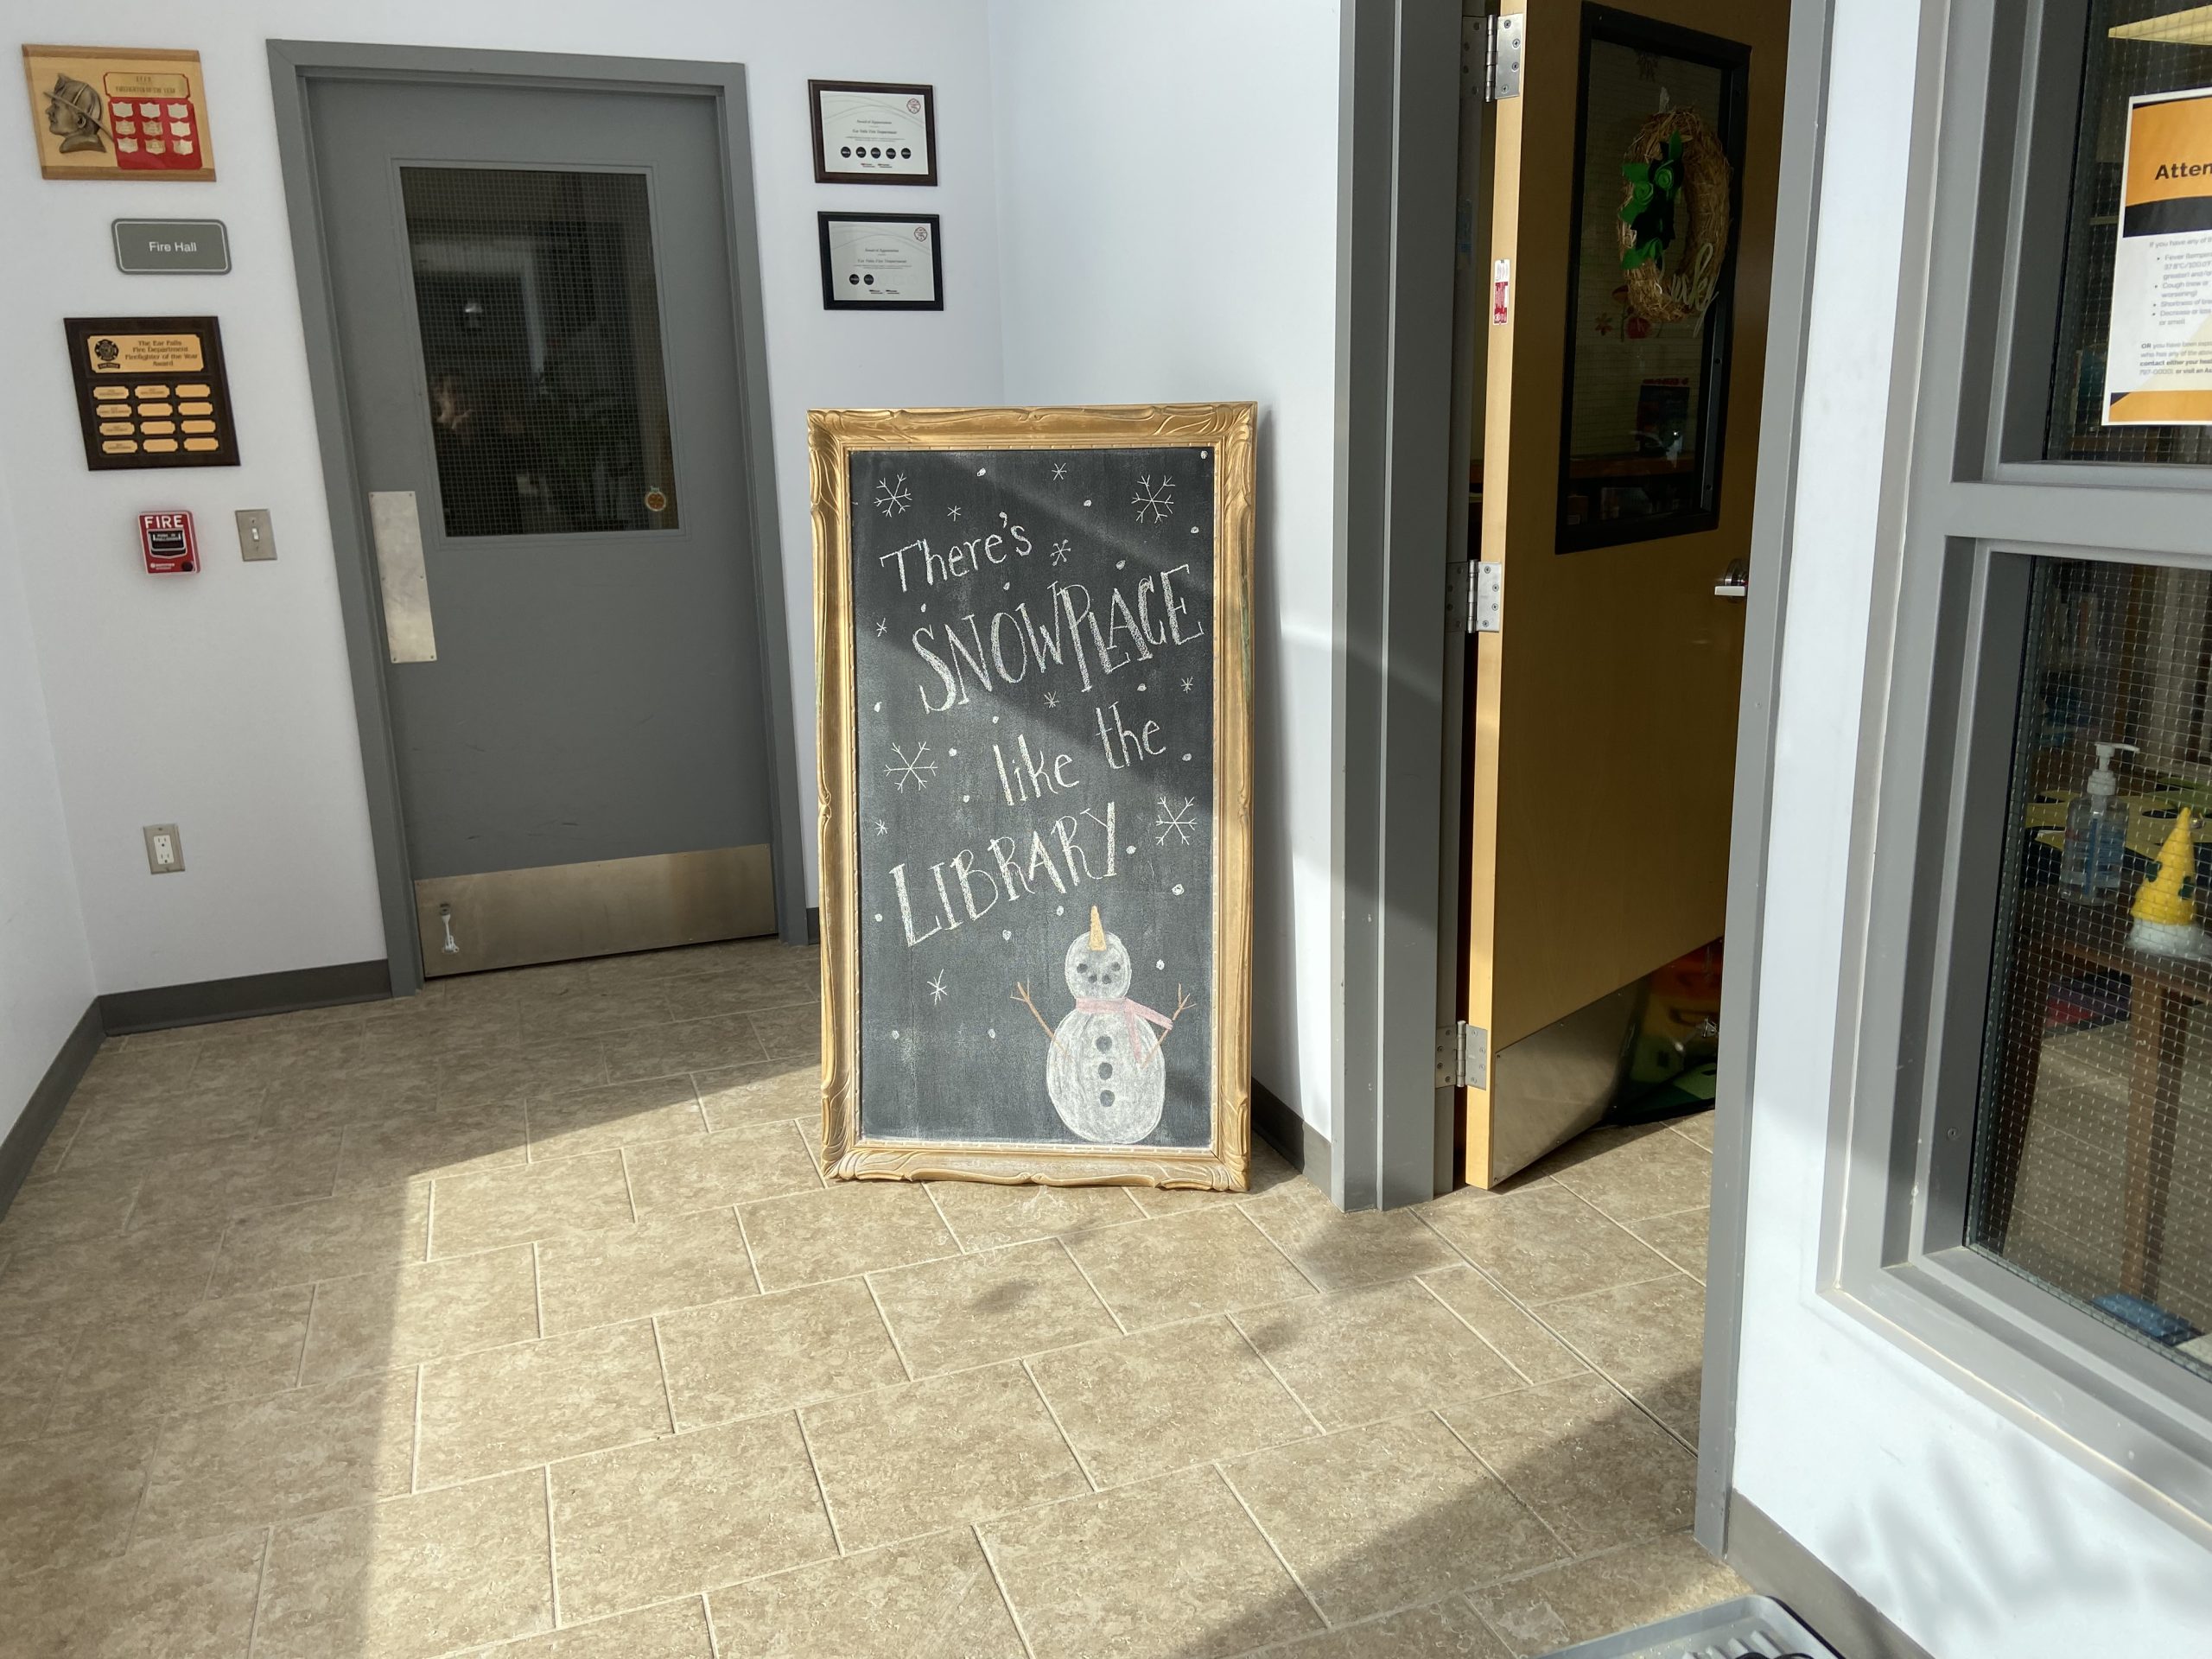 A view of one of the chalkboard drawings often displayed in the front of the library. THis one reads "There's SNOW PLACE like the LIBRARY!" with a drawing of a snowman underneath.